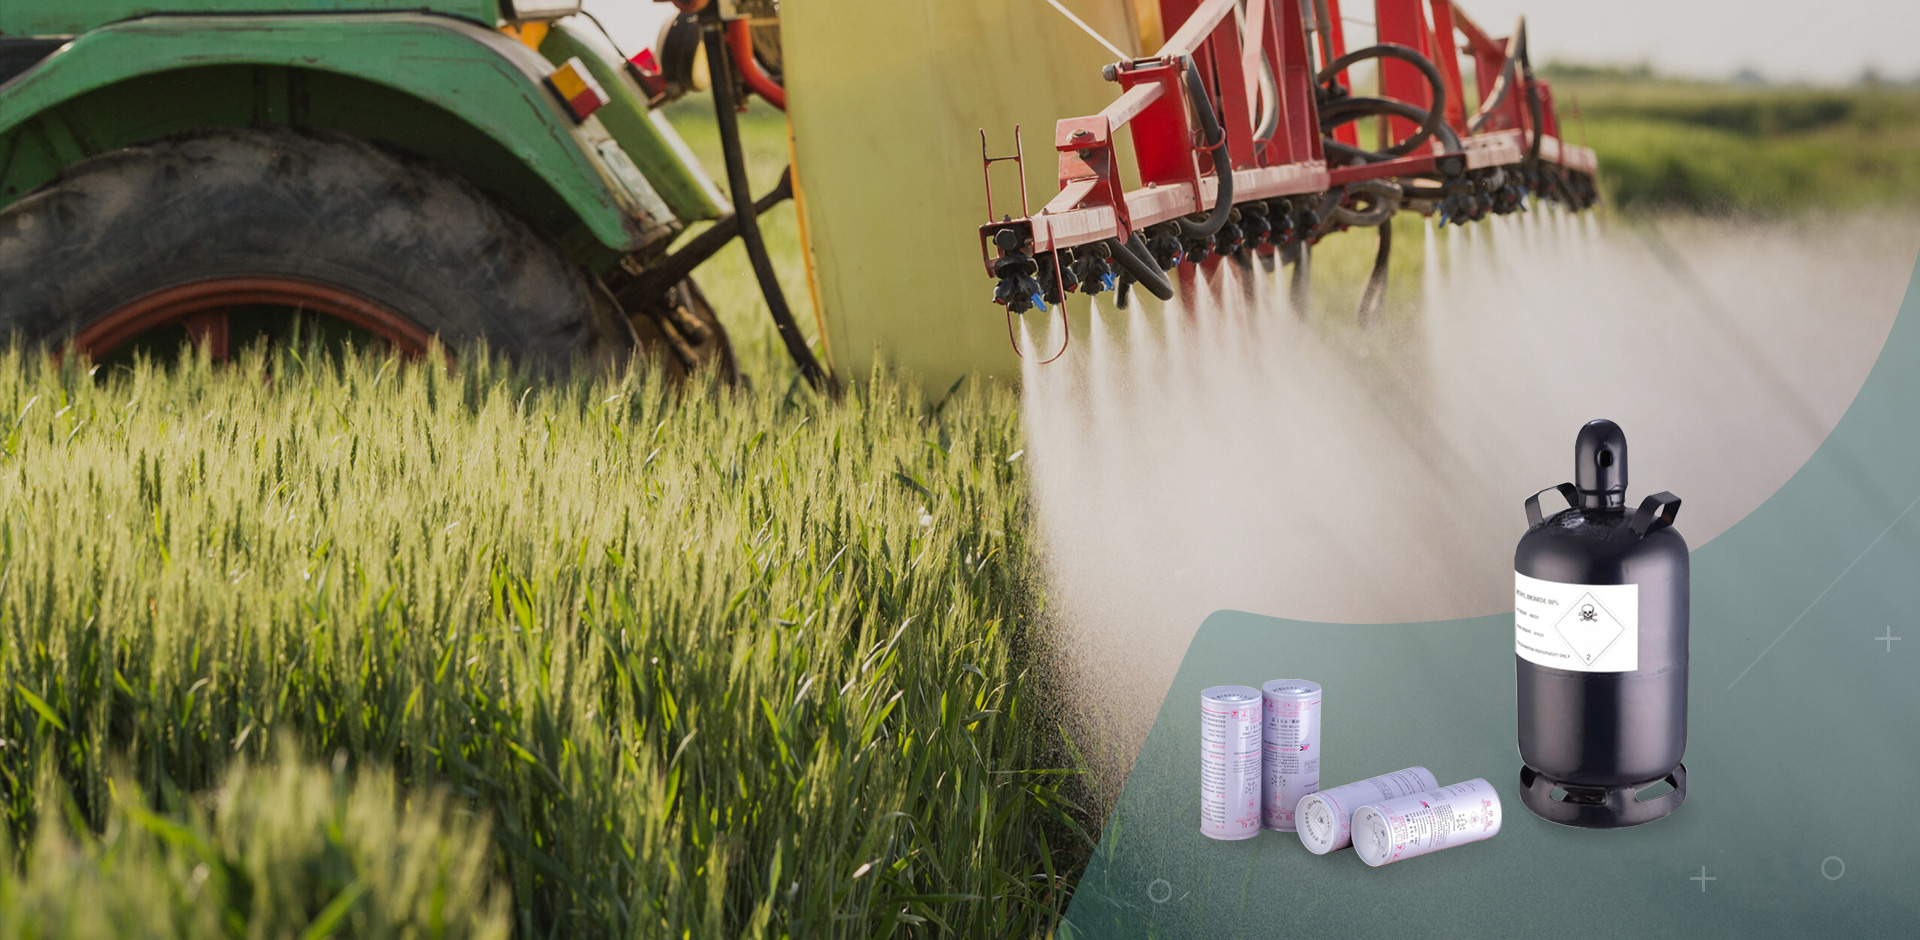 Your global partner in pesticide chemicals